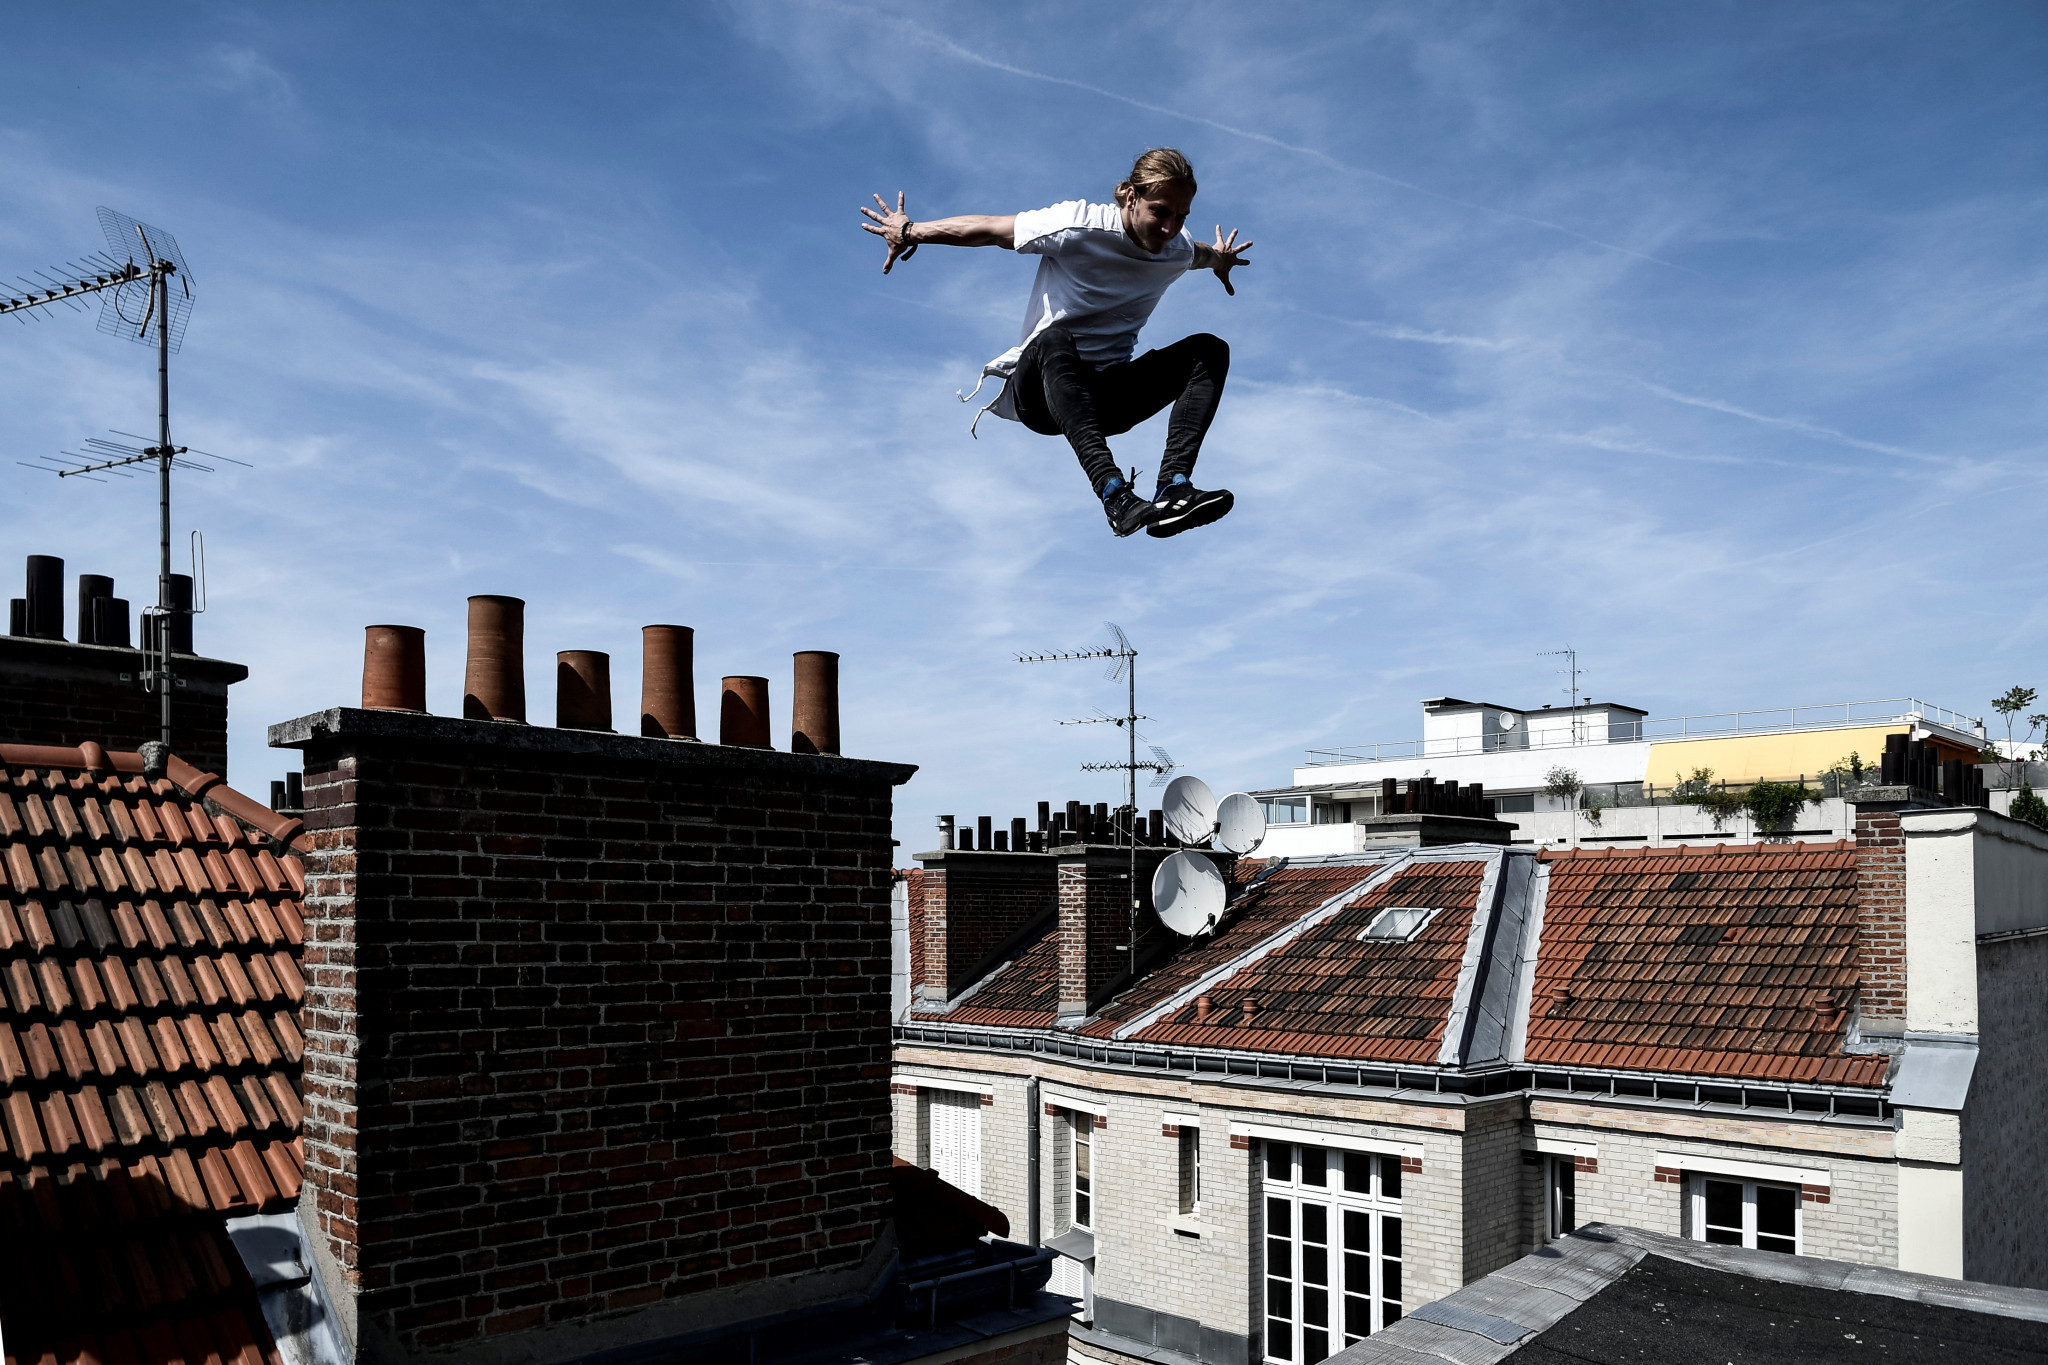 The FIG's move into parkour has been continually criticised by rival groups in the sport ©Getty Images